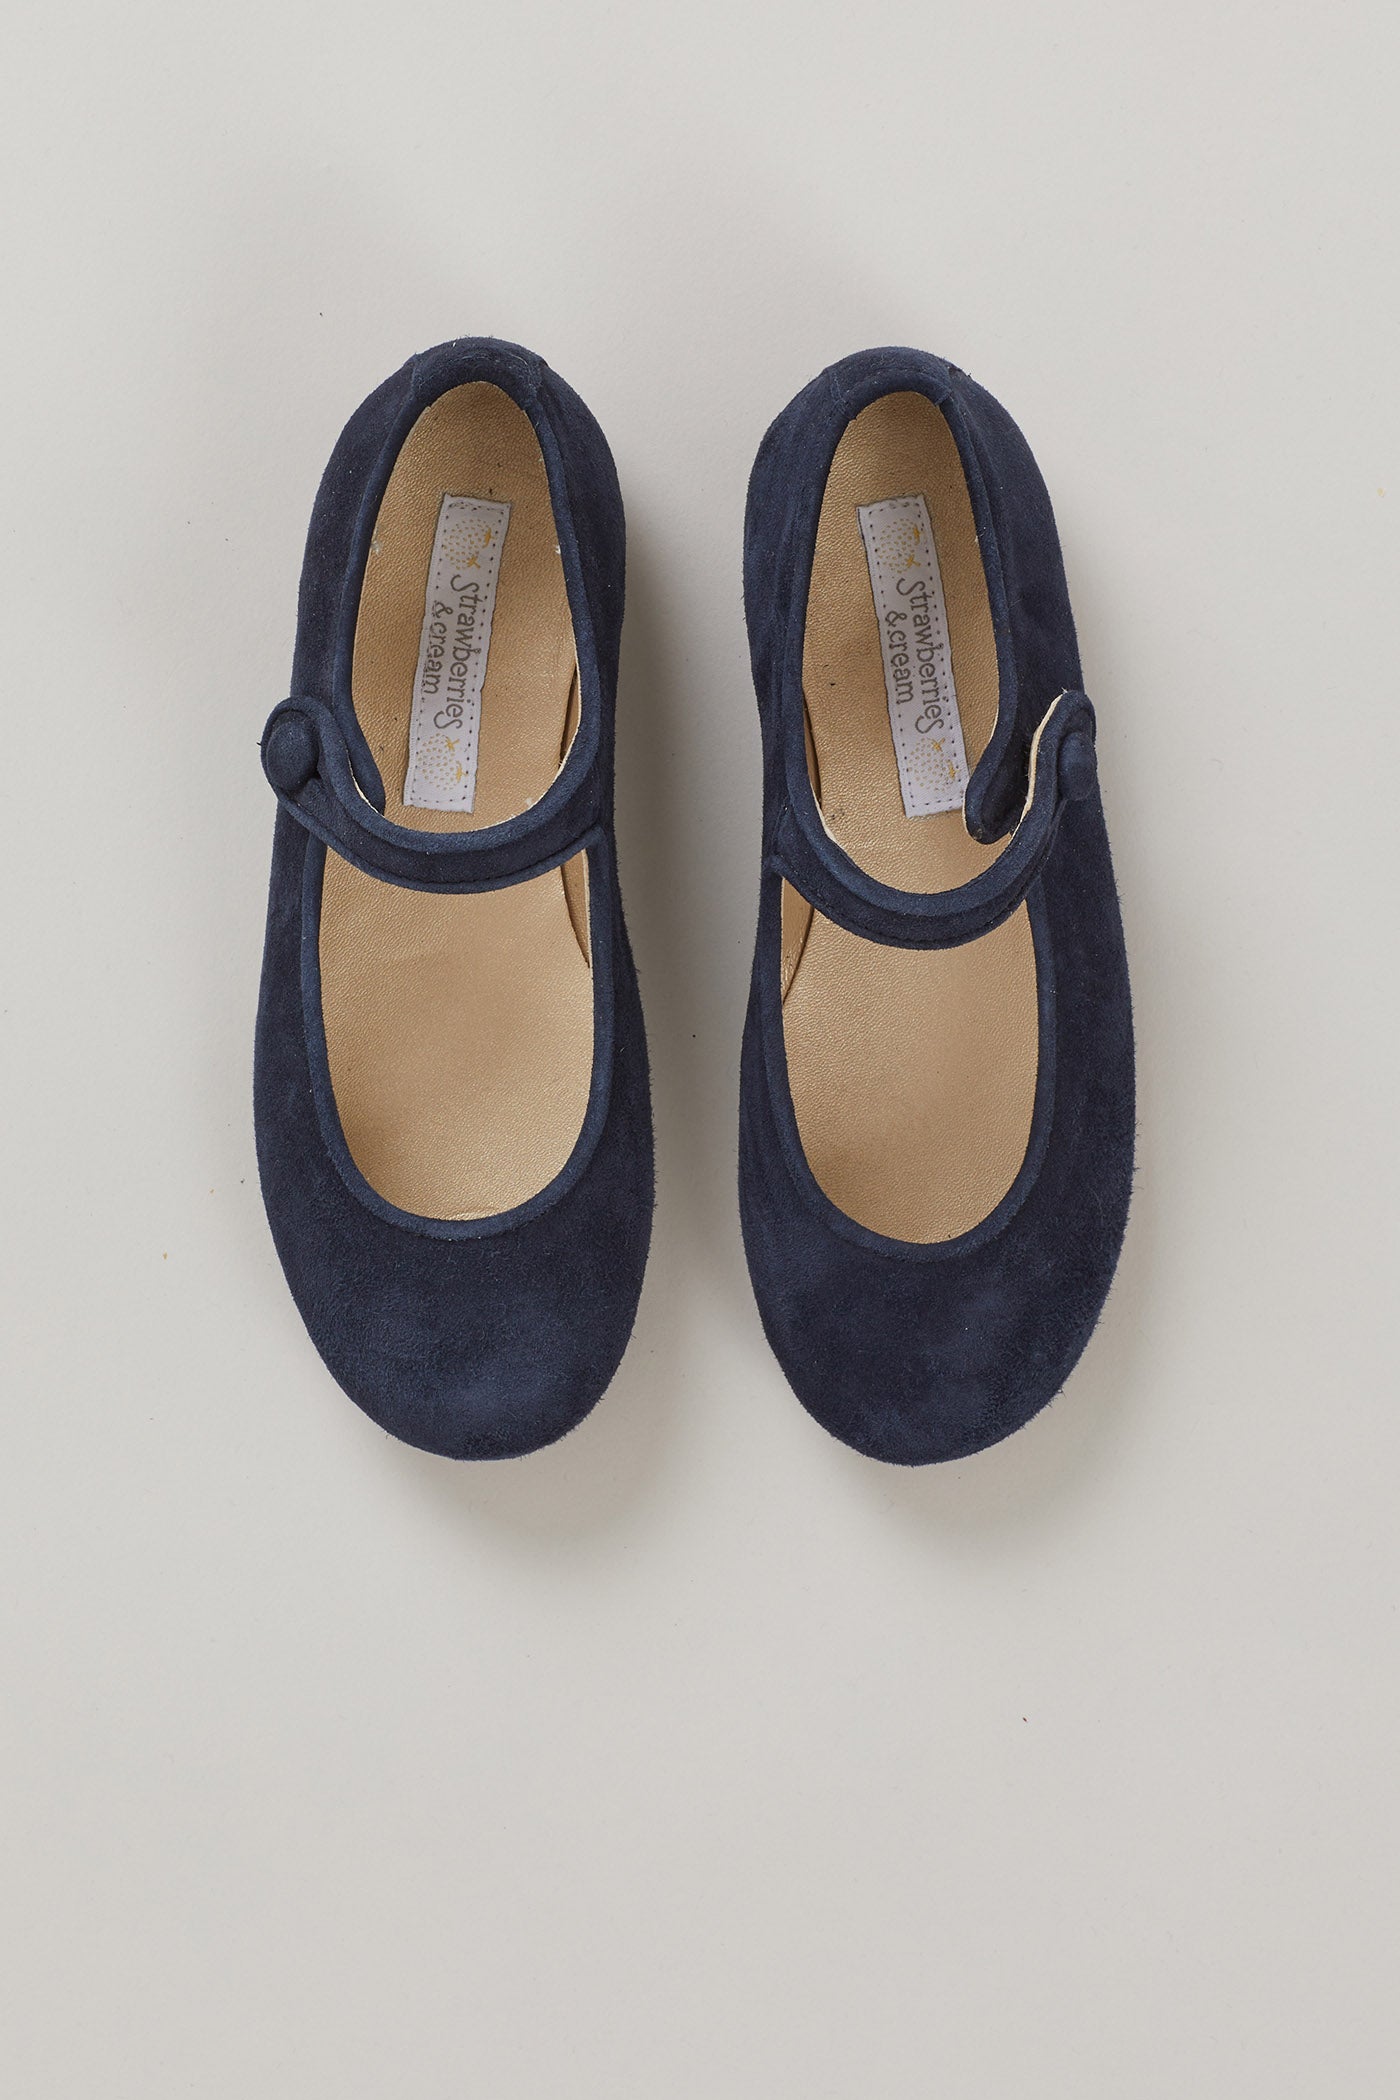 Suede Mary Jane Navy